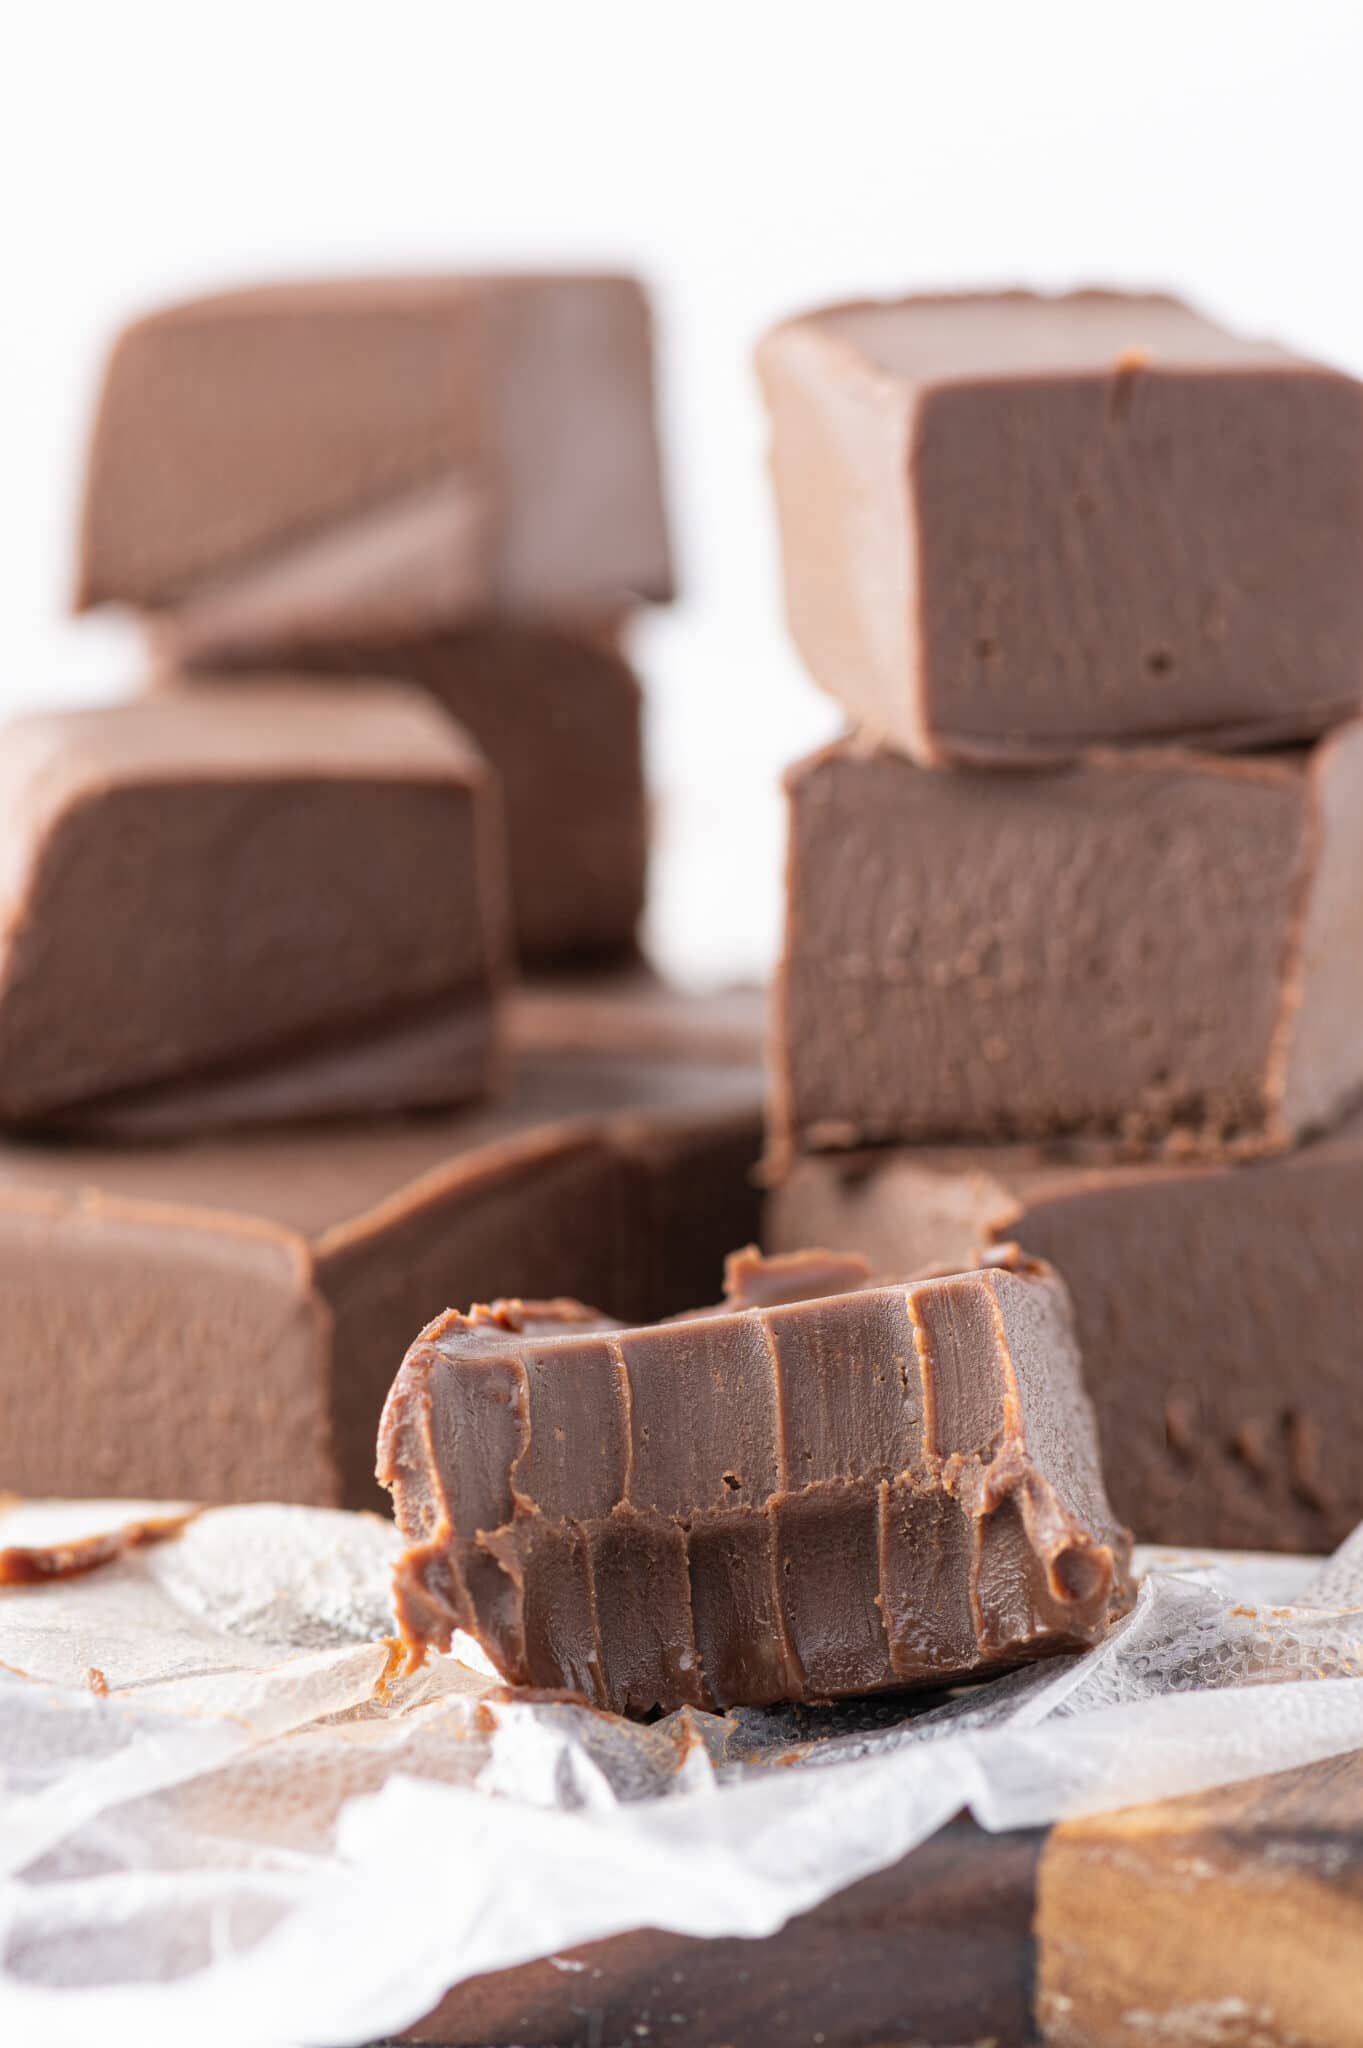 A piece of keto fudge in the foreground with a bite taken from it, with more fudge cubes from this recipe stacked in the background.